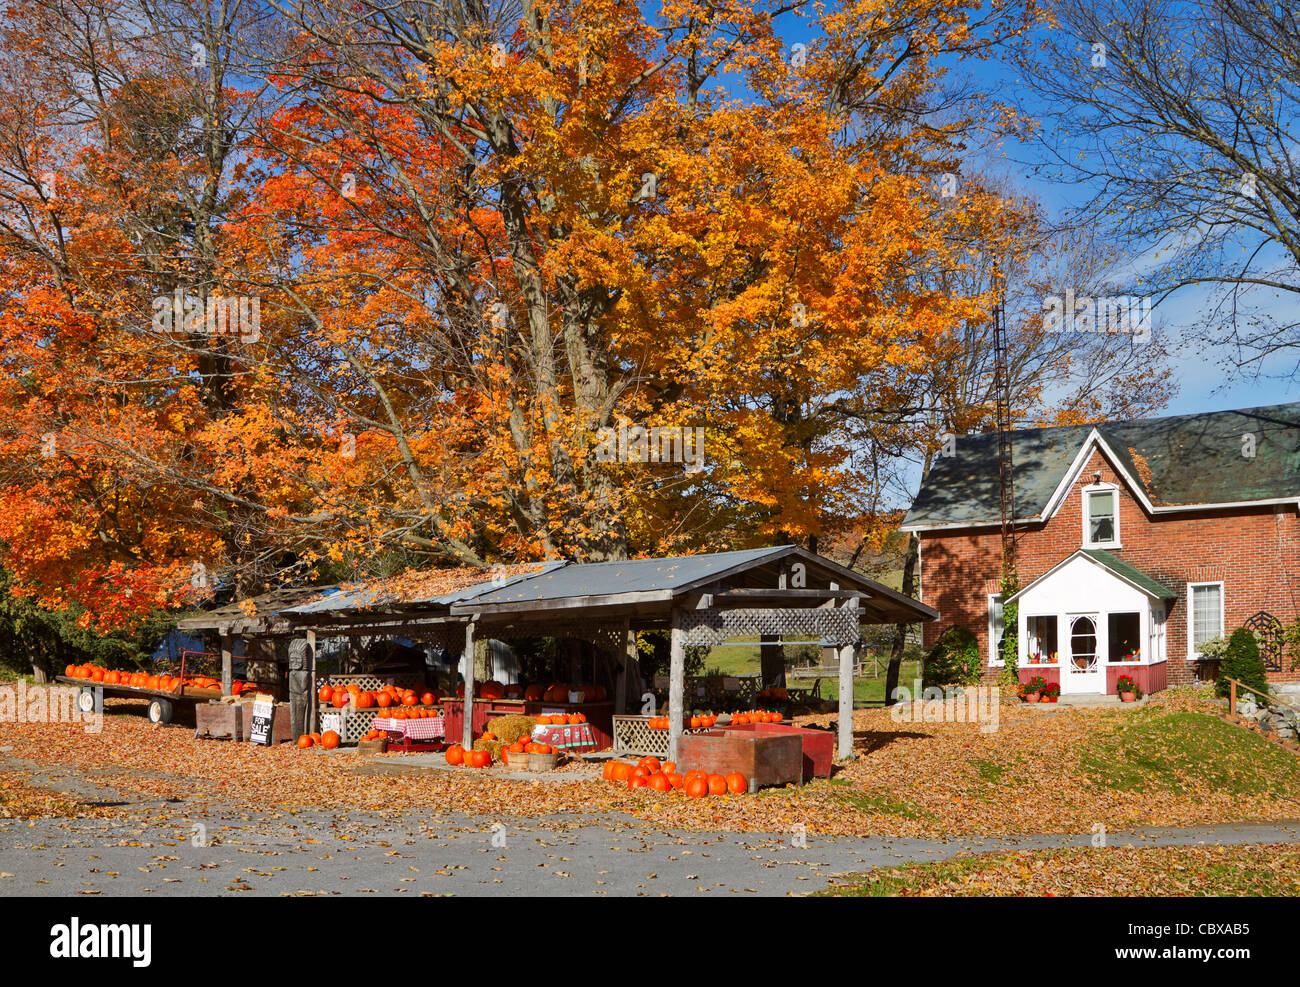 Roadside stand selling pumpkins and firewood, and typical historic brick house in rural Southern Ontario, Canada. Stock Photo